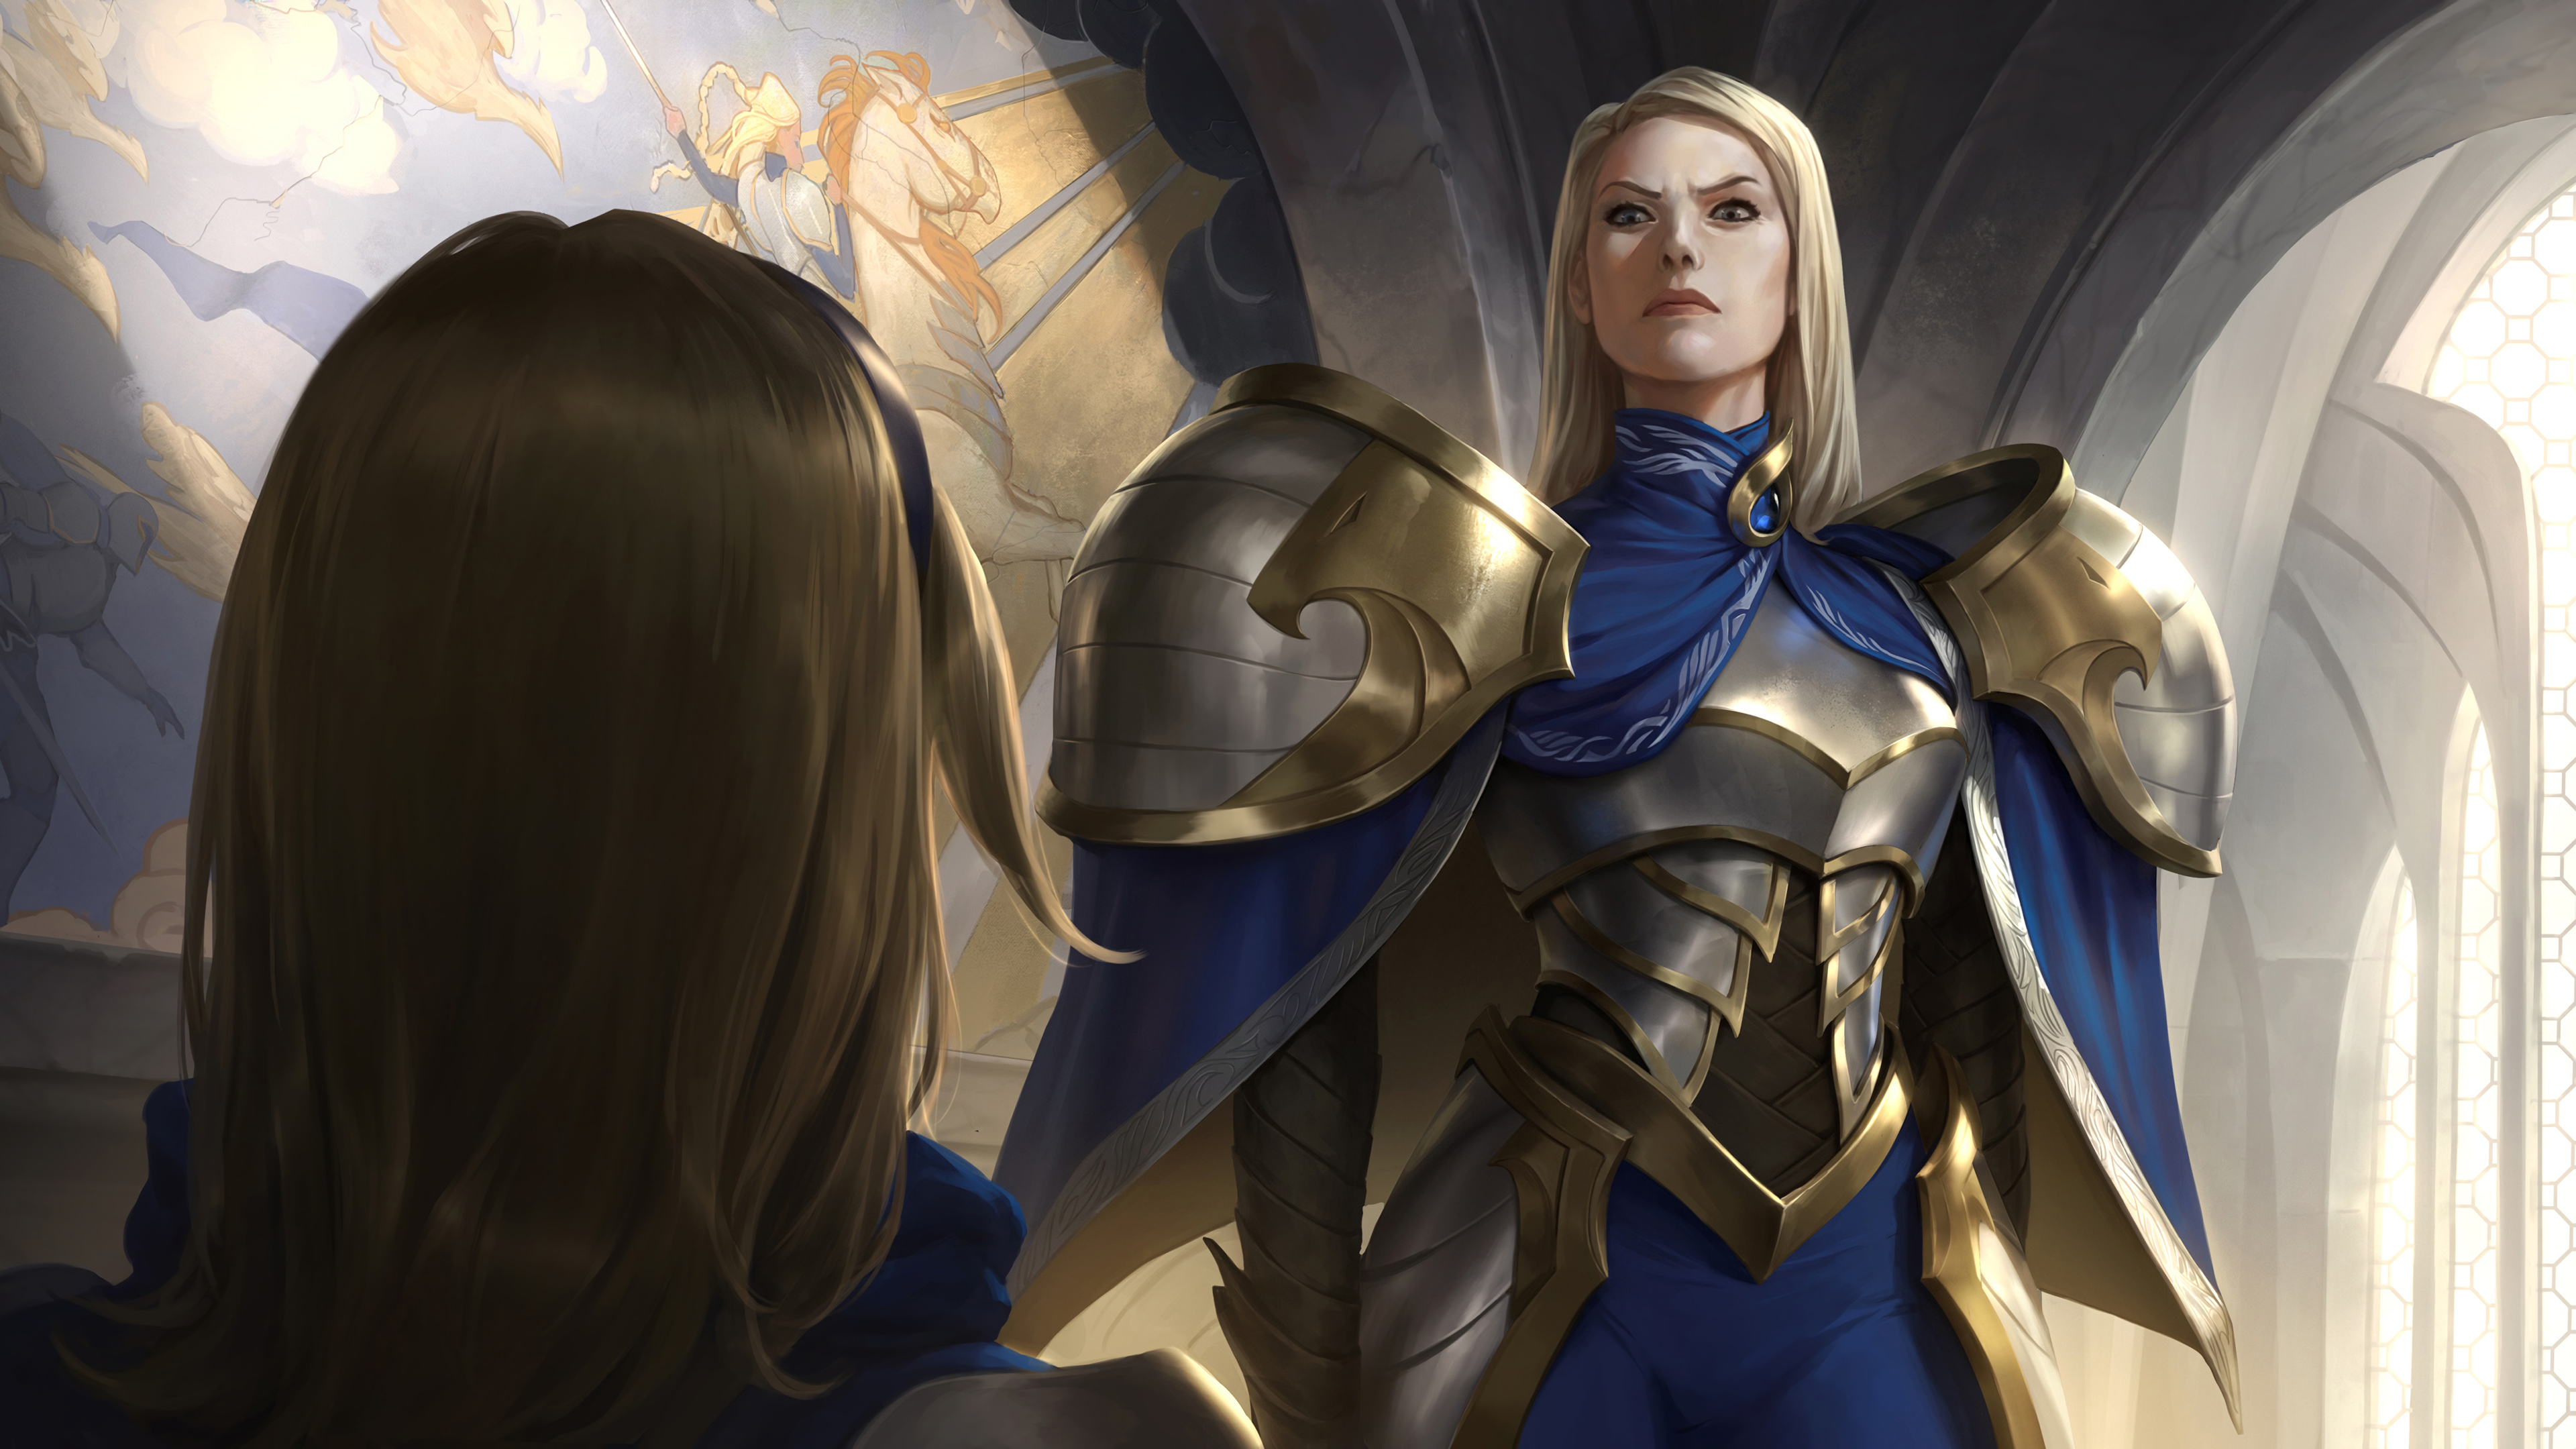 General 3840x2160 Legends of Runeterra League of Legends armor women knight Riot Games video games video game characters frown closed mouth female warrior long hair